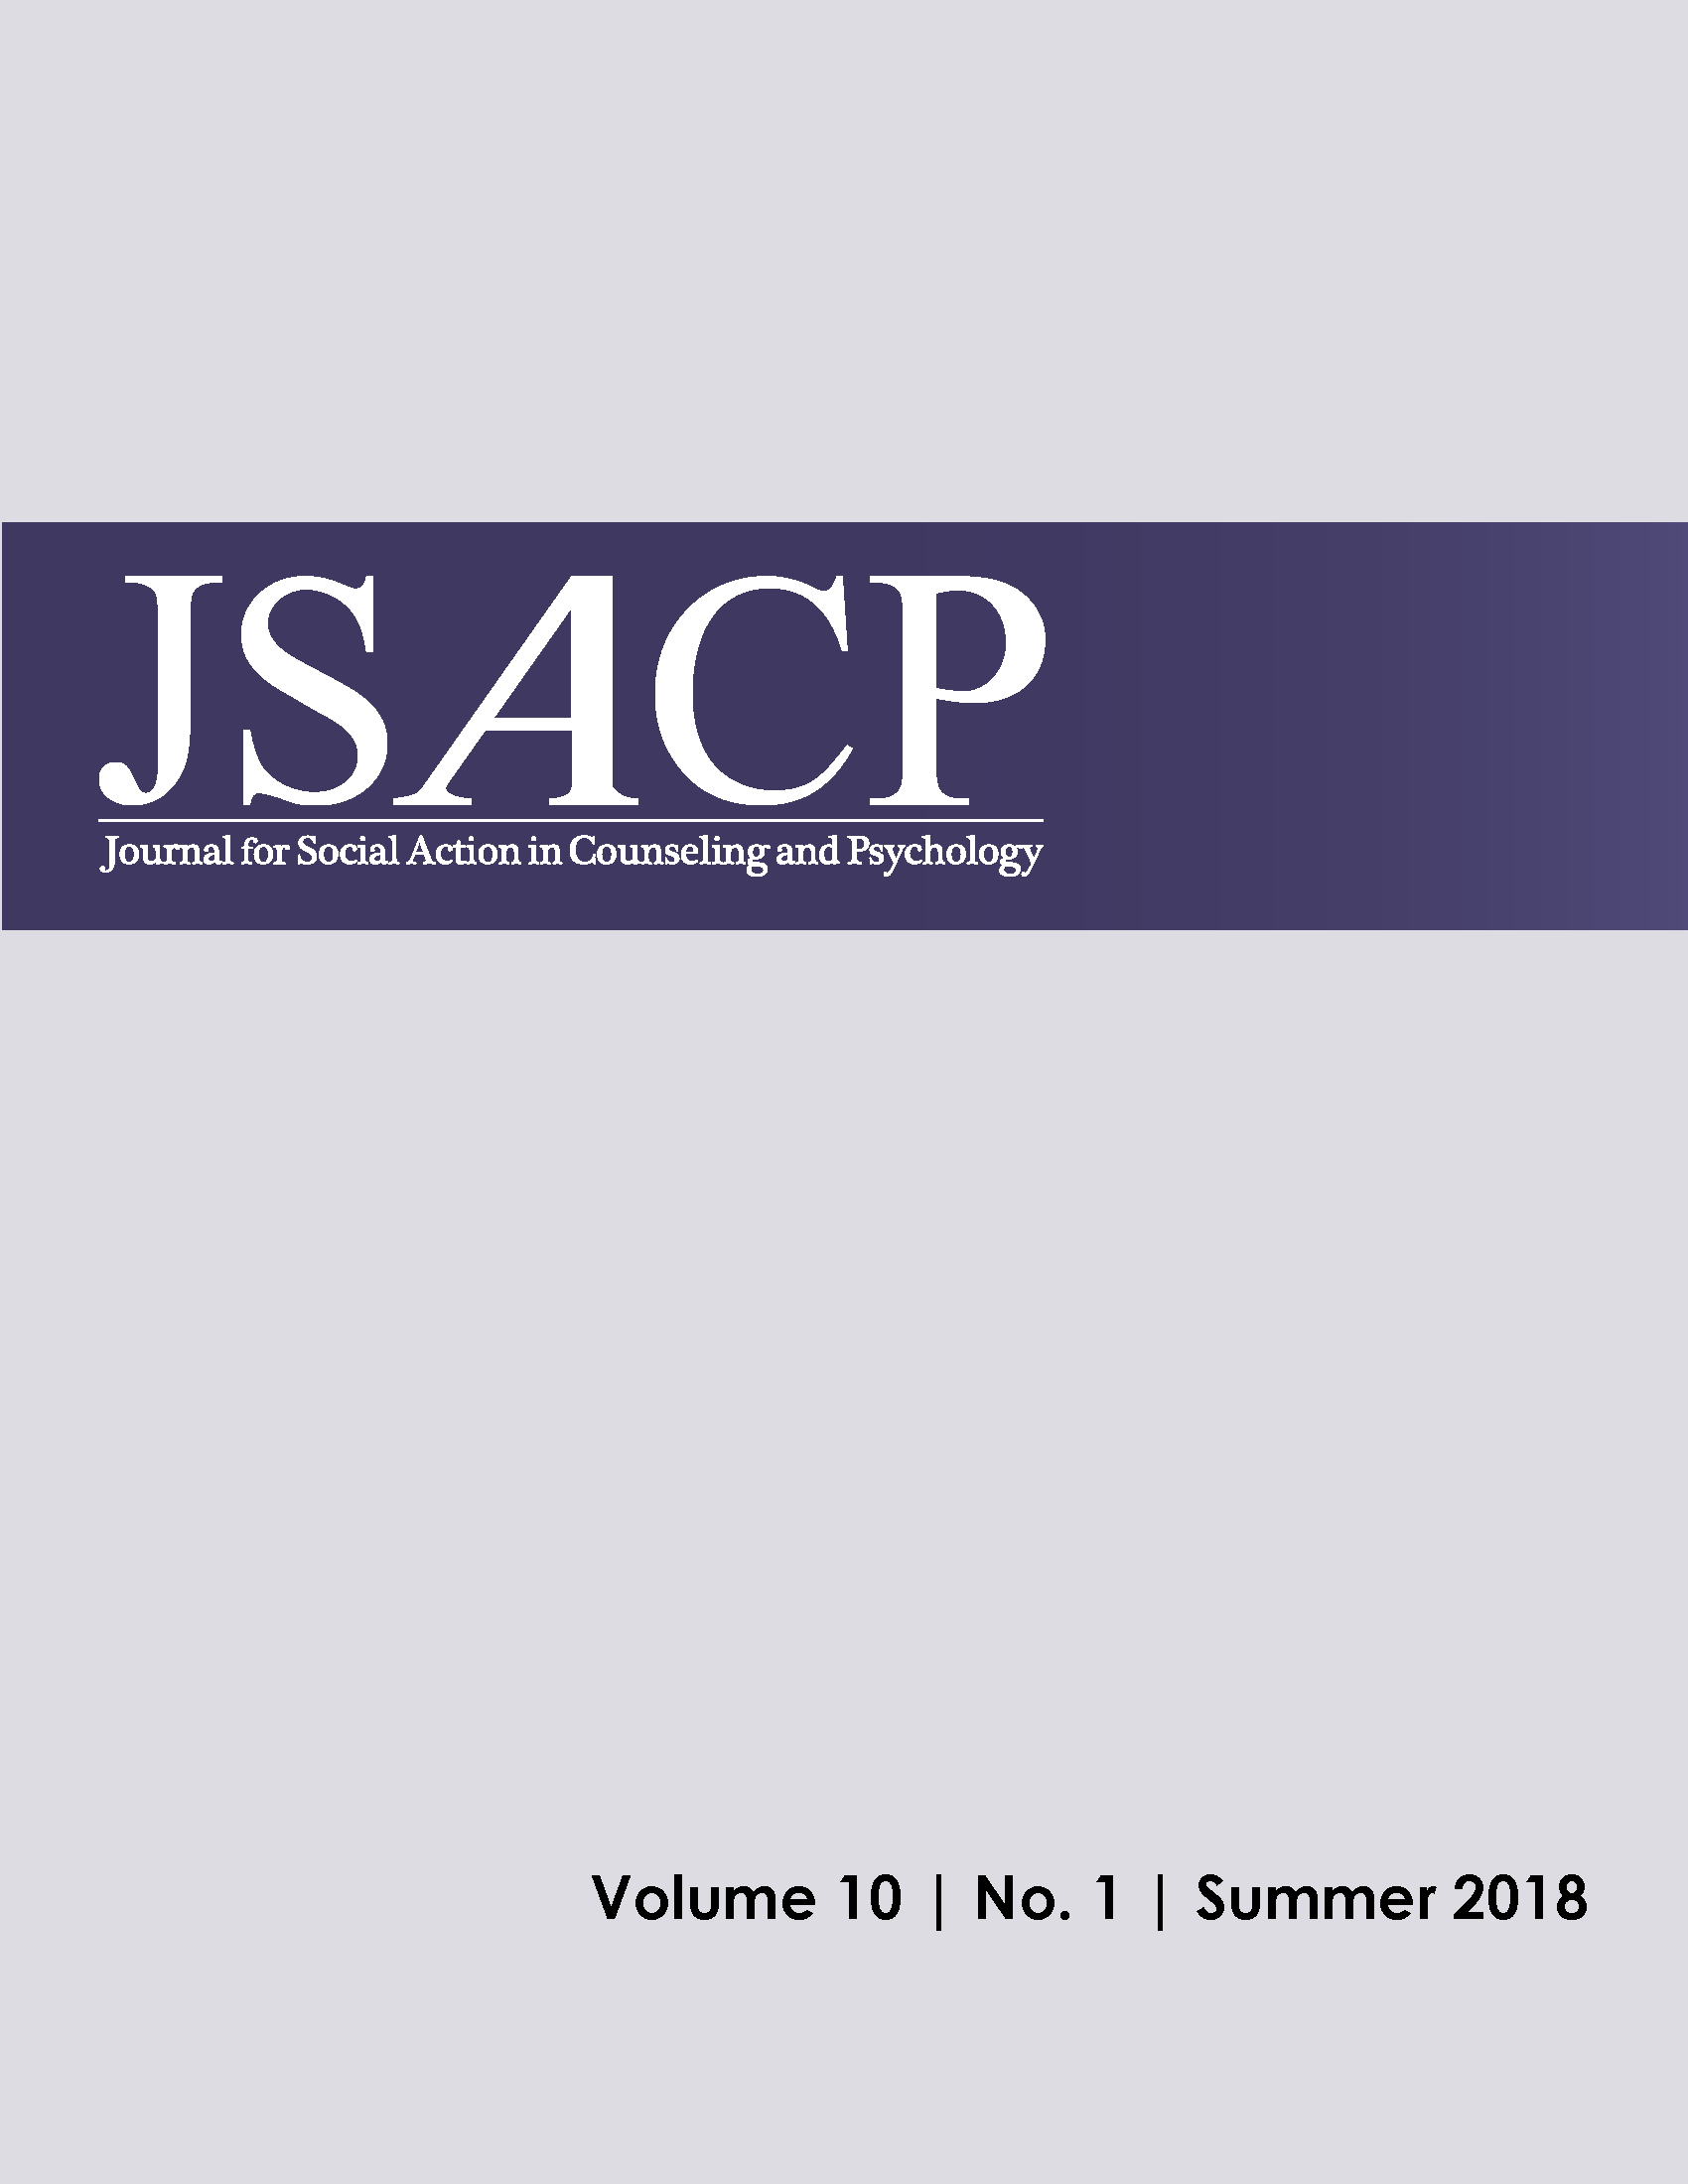 					View Vol. 10 No. 1 (2018): Journal for Social Action in Counseling and Psychology, Summer      2018
				